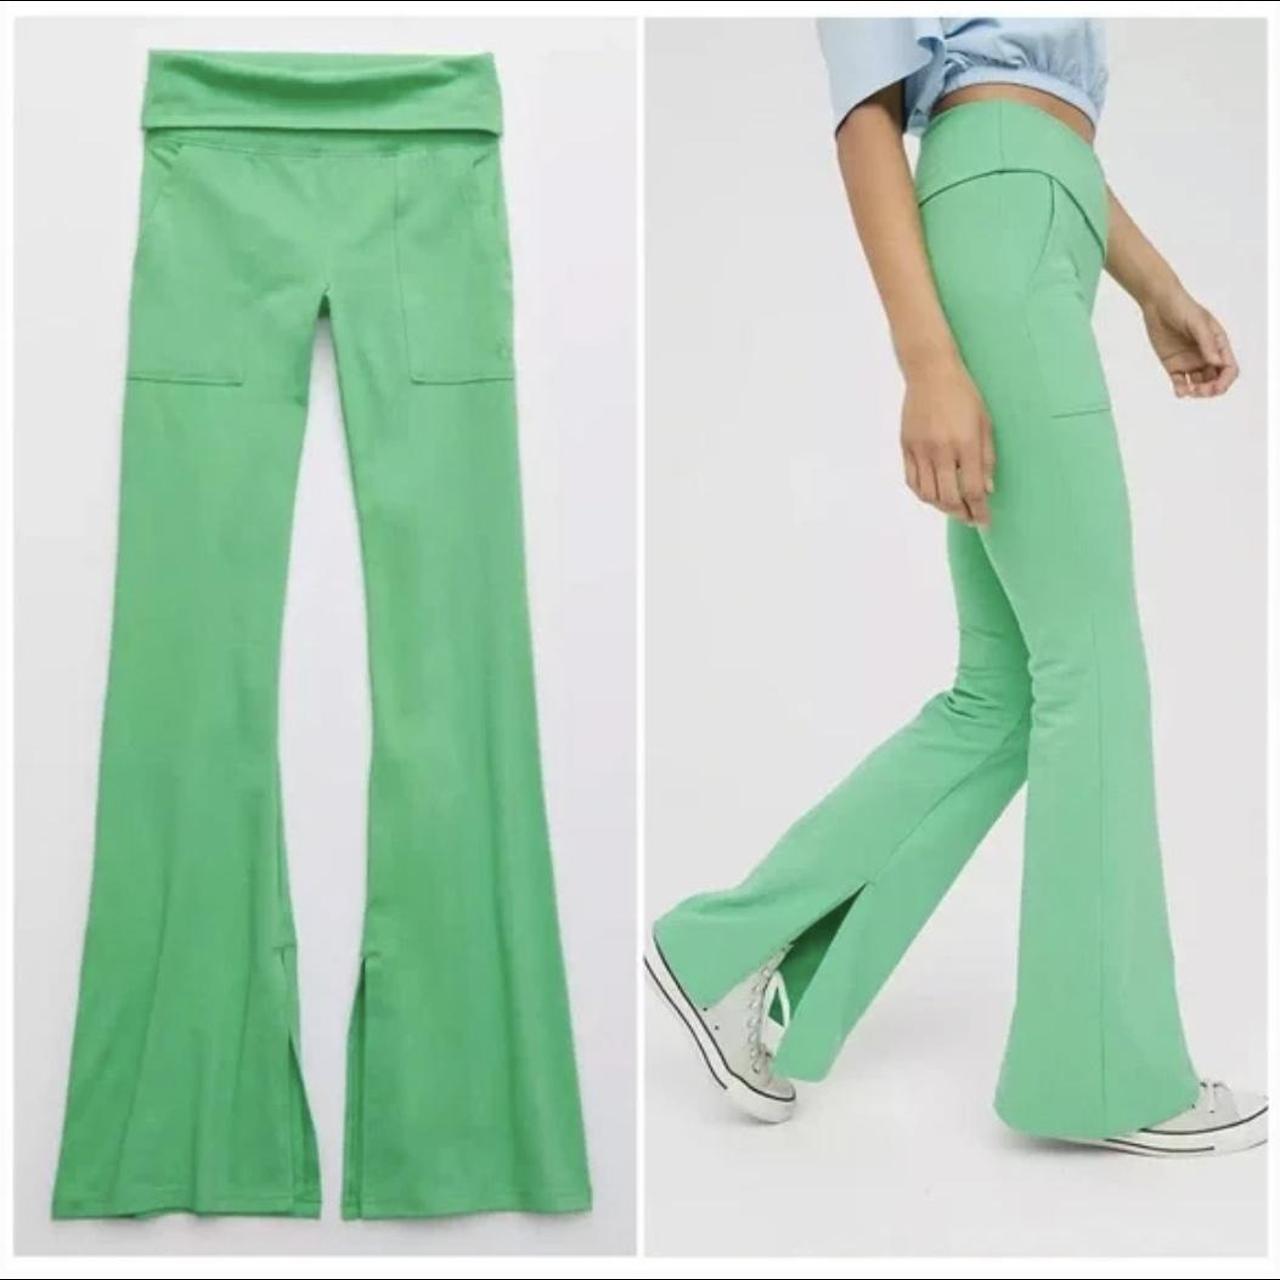 Kelly green Aerie flared leggings. Perfect for GBD